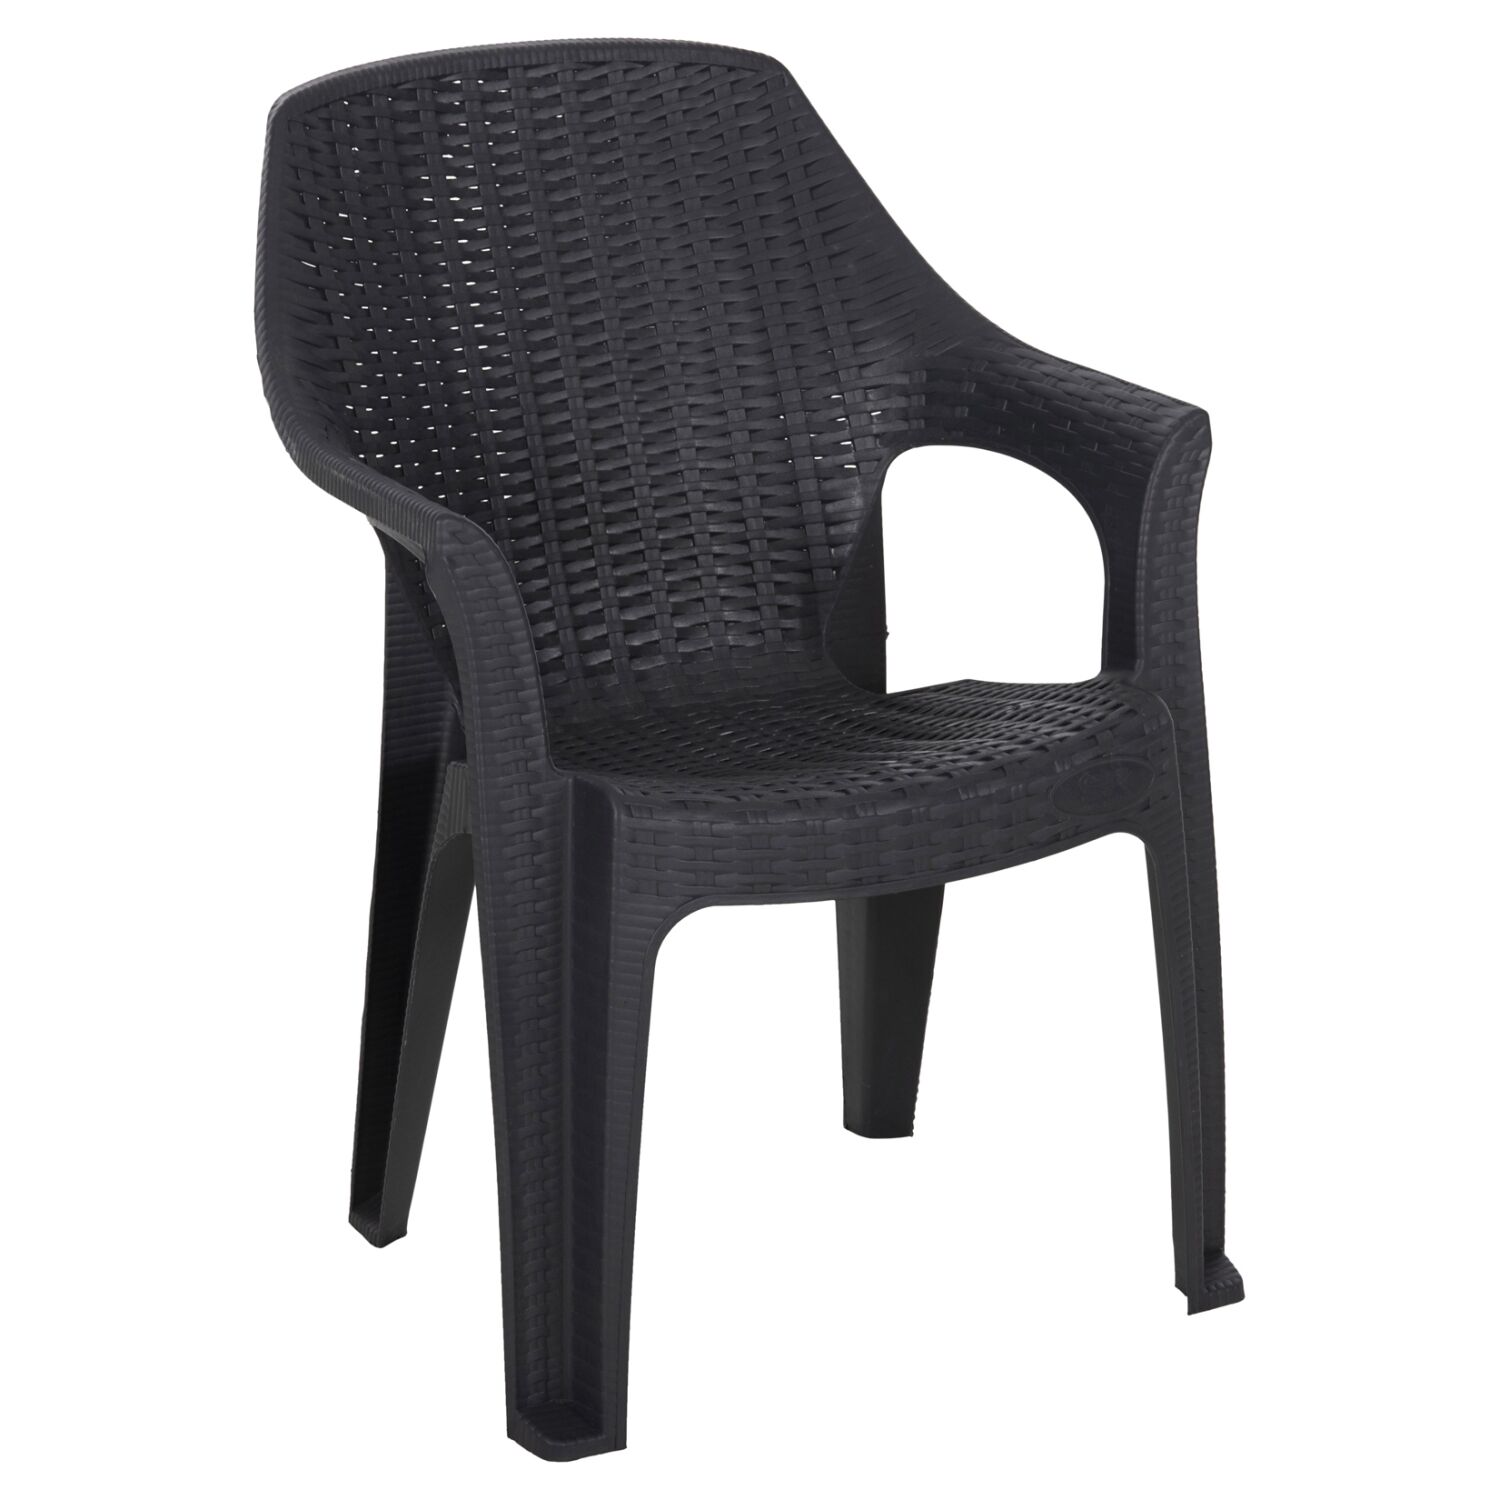 POLYPROPYLENE ARMCHAIR ABEL HM6143.01 IN ANTHRACITE COLOR 61x60x85Hcm.